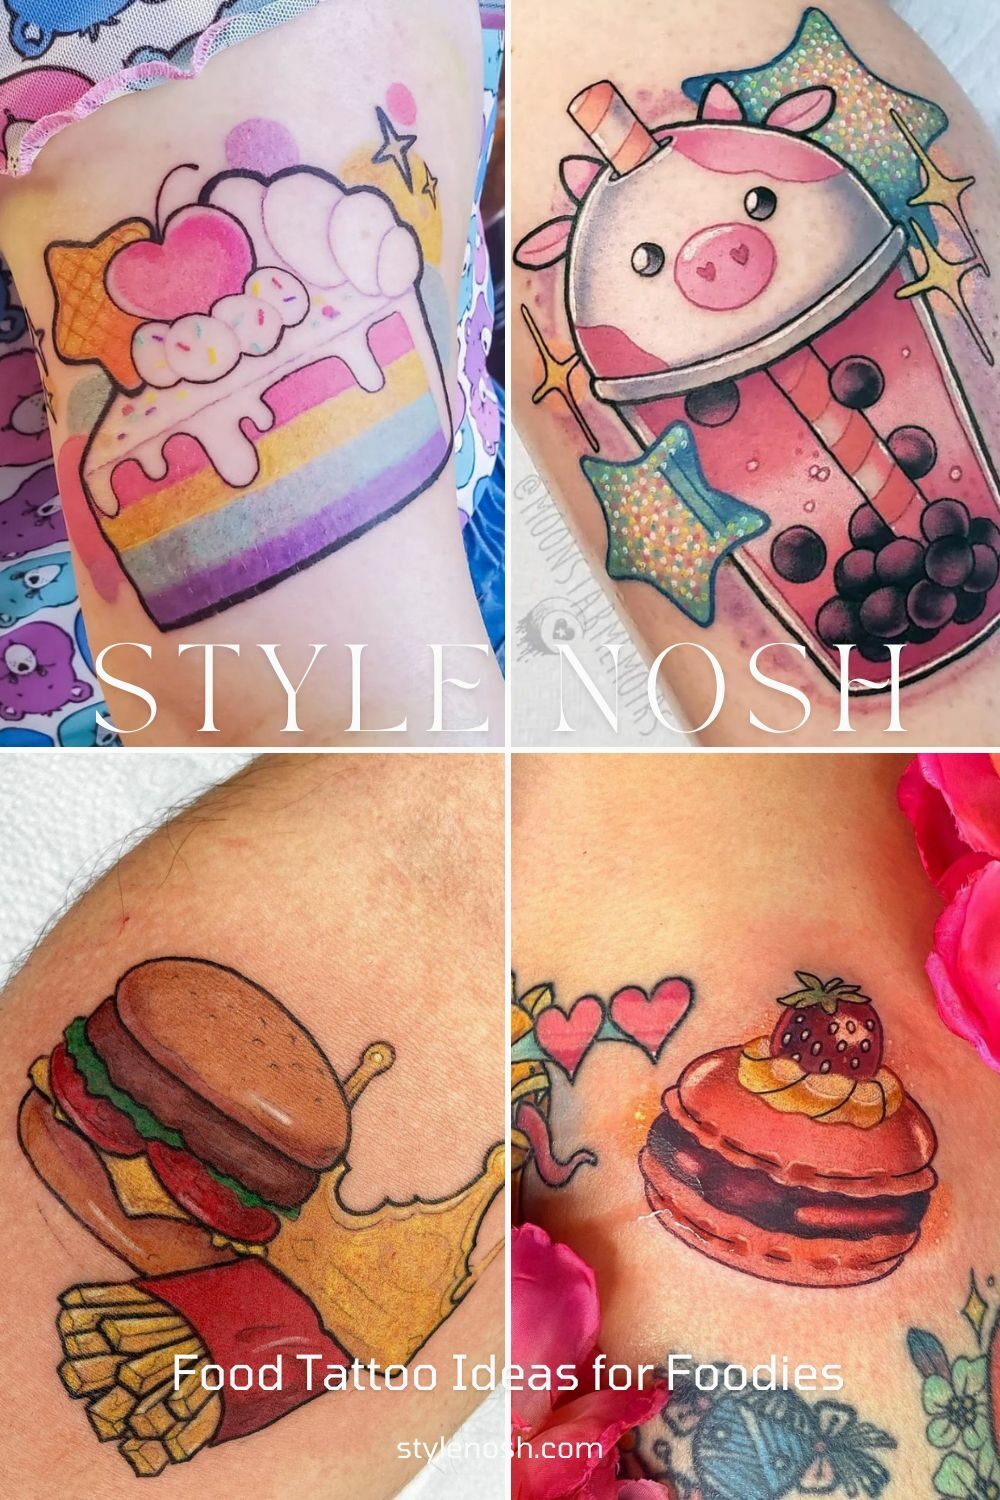 Choose an imaginative food tattoo to decorate your forearm or finger if youre a tattoo enthusiast